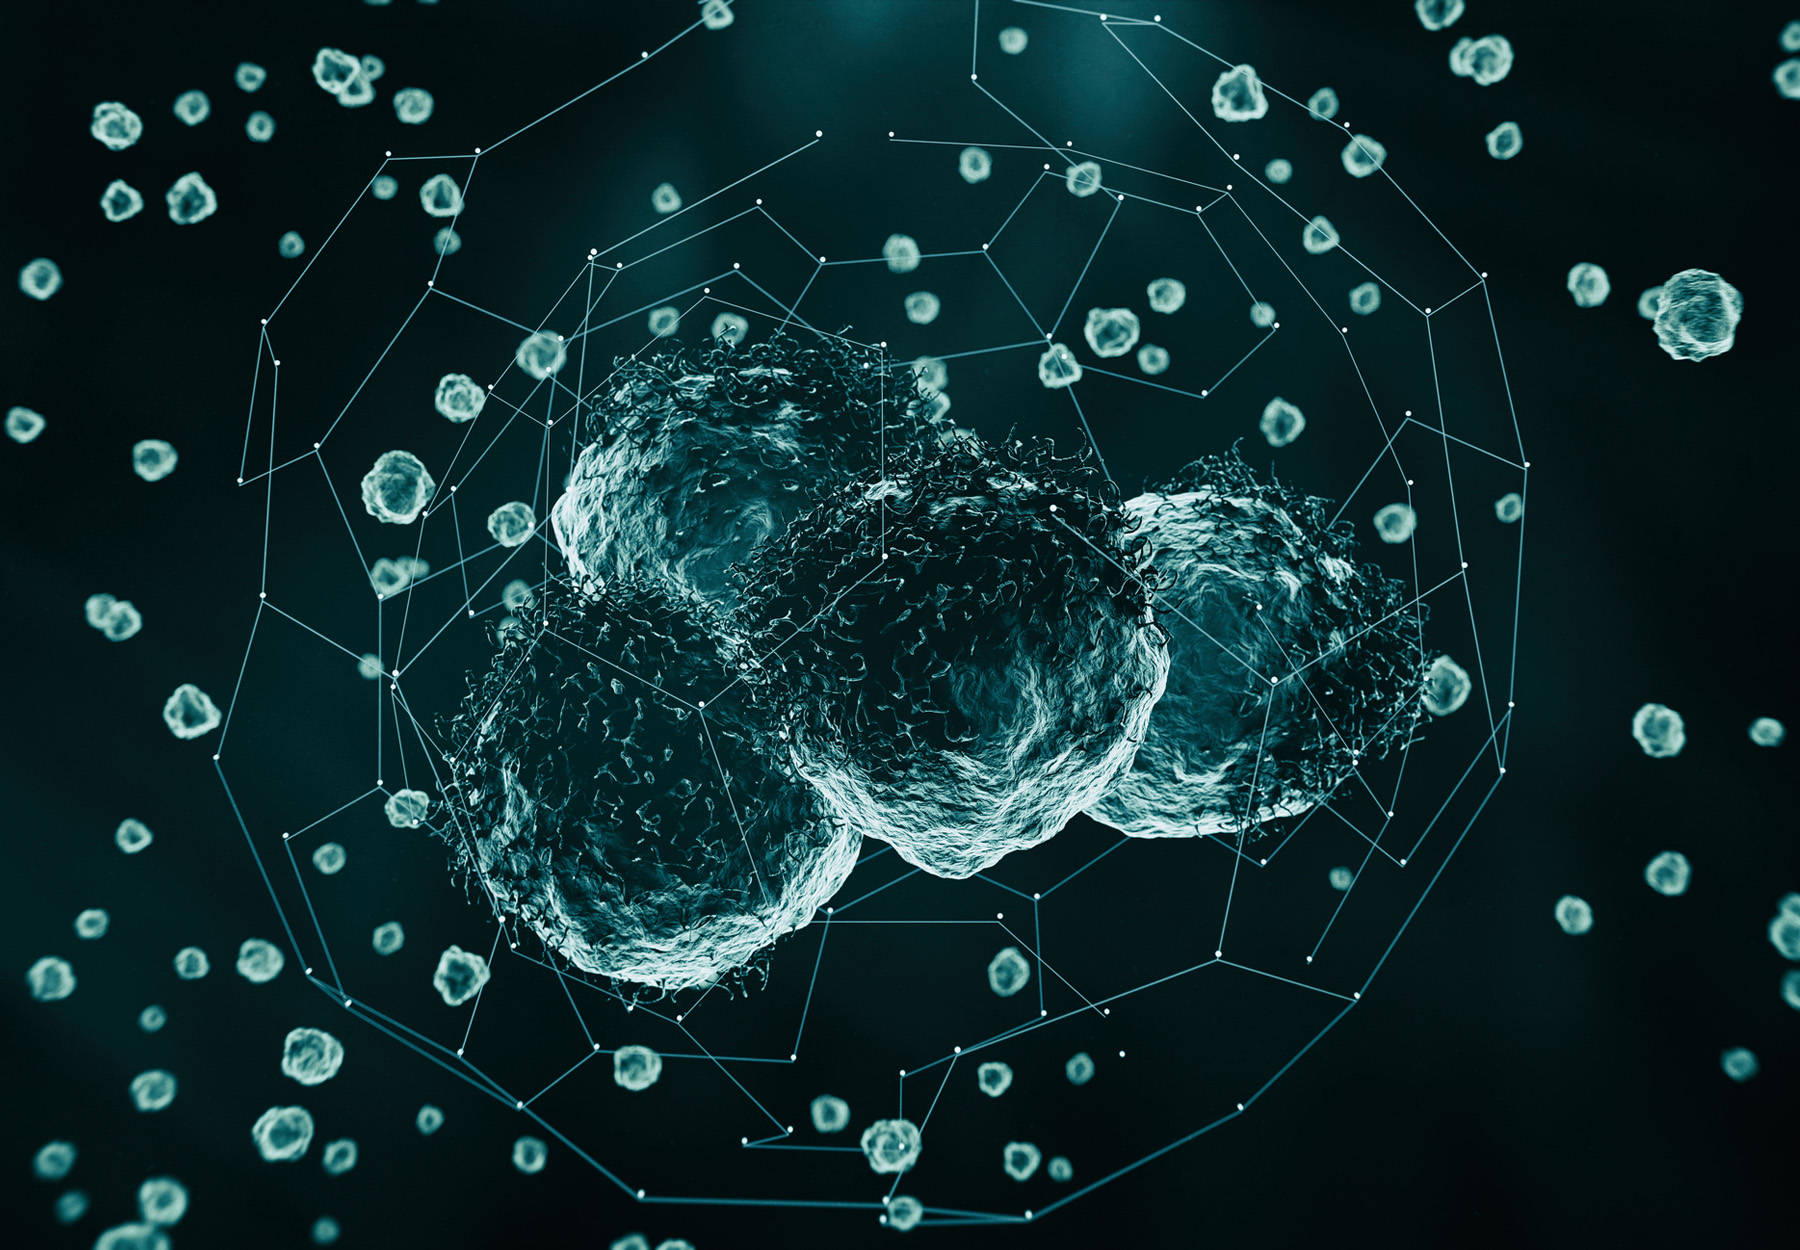 Teal-colored stylized image of cancer cells on a black background. Cancer testing concept. Stock image.